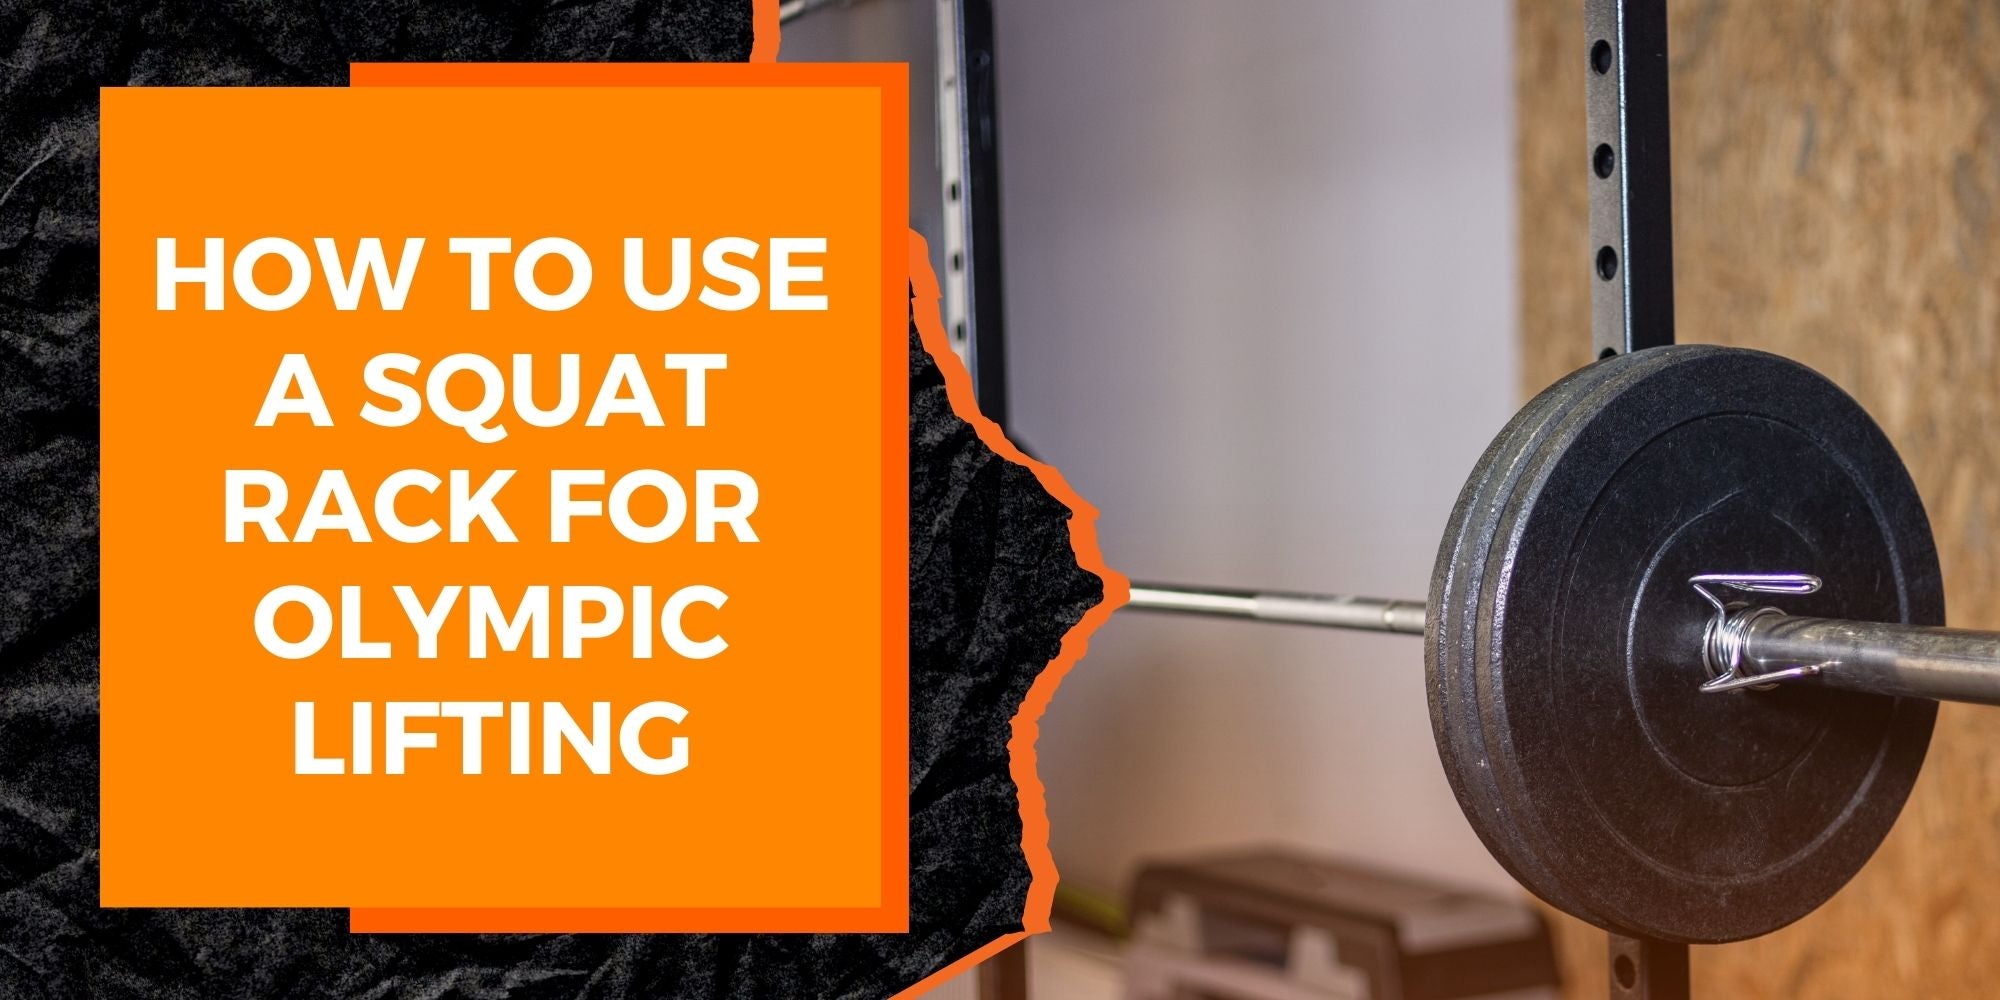 How to Use a Squat Rack for Olympic Lifting